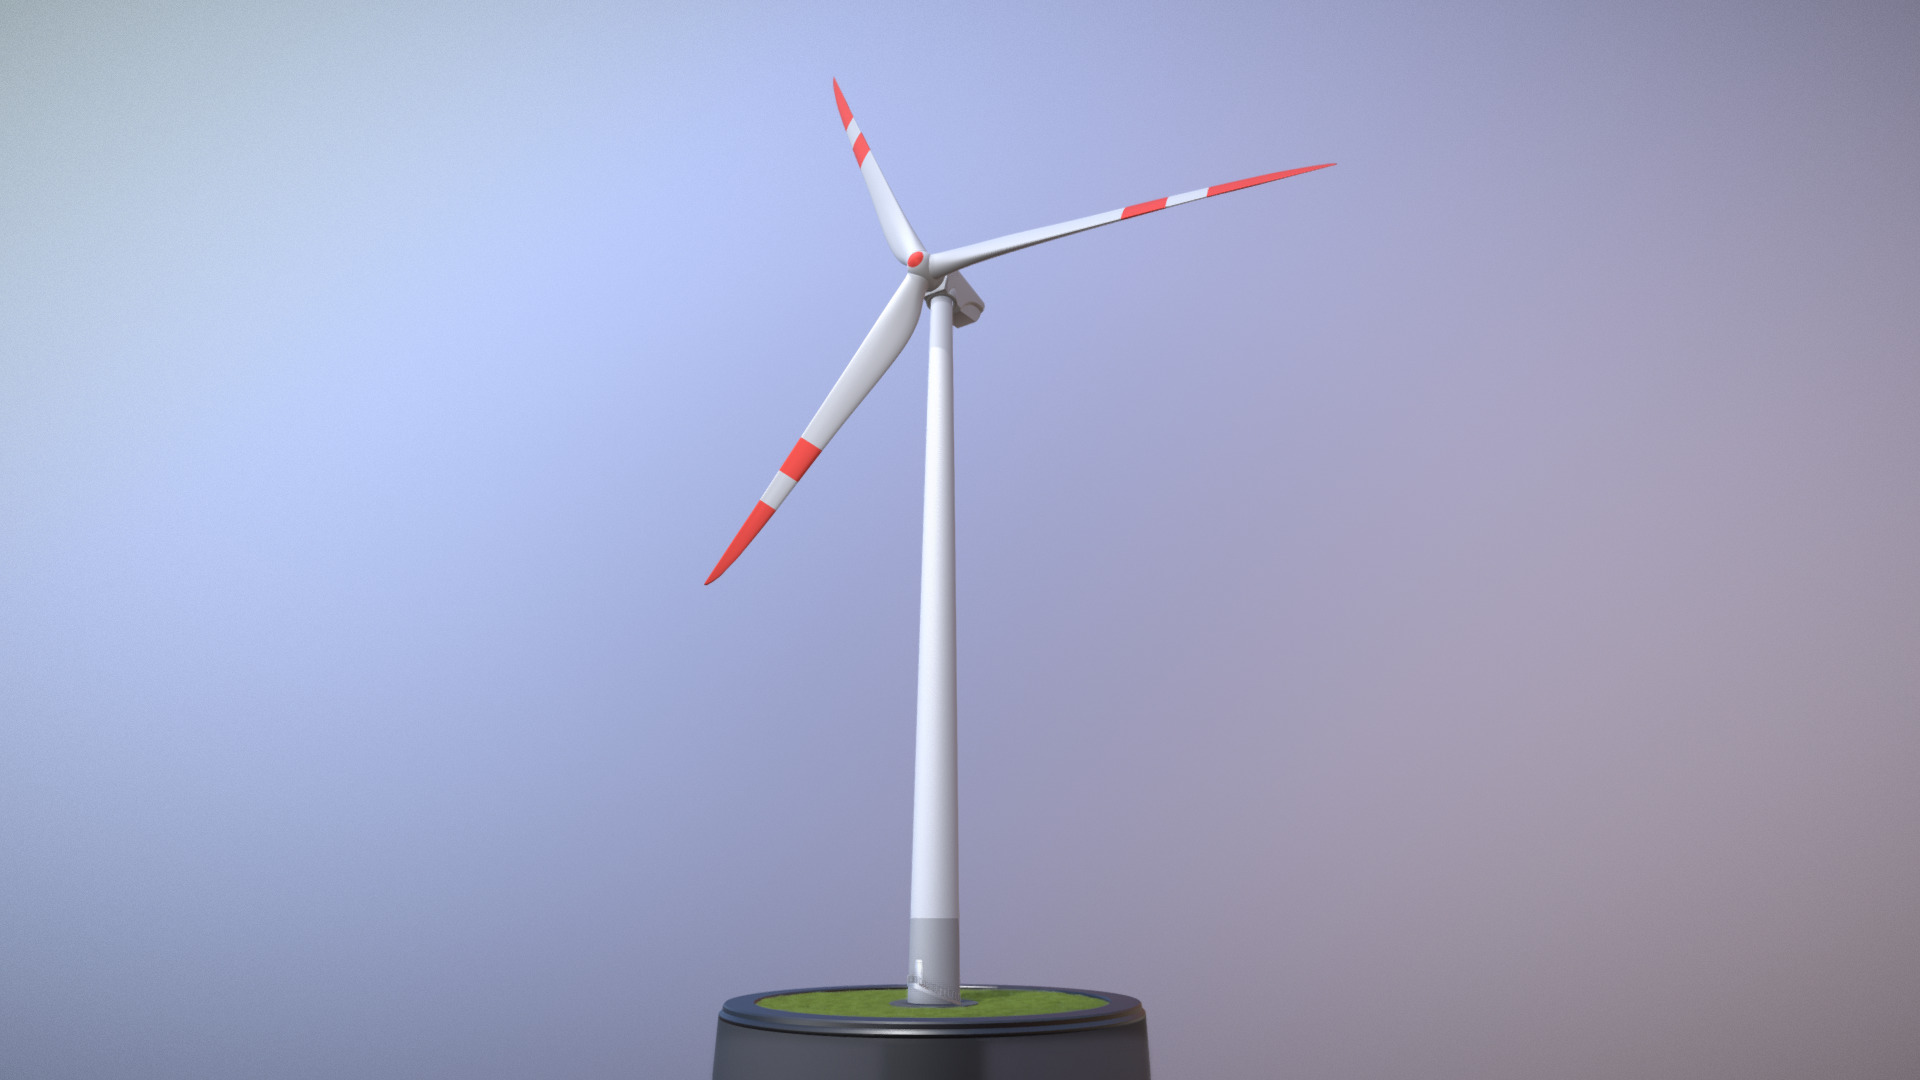 3D model Windkraftanlage mit Eingang - This is a 3D model of the Windkraftanlage mit Eingang. The 3D model is about a wind turbine on a stand with Wind Wand in the background.